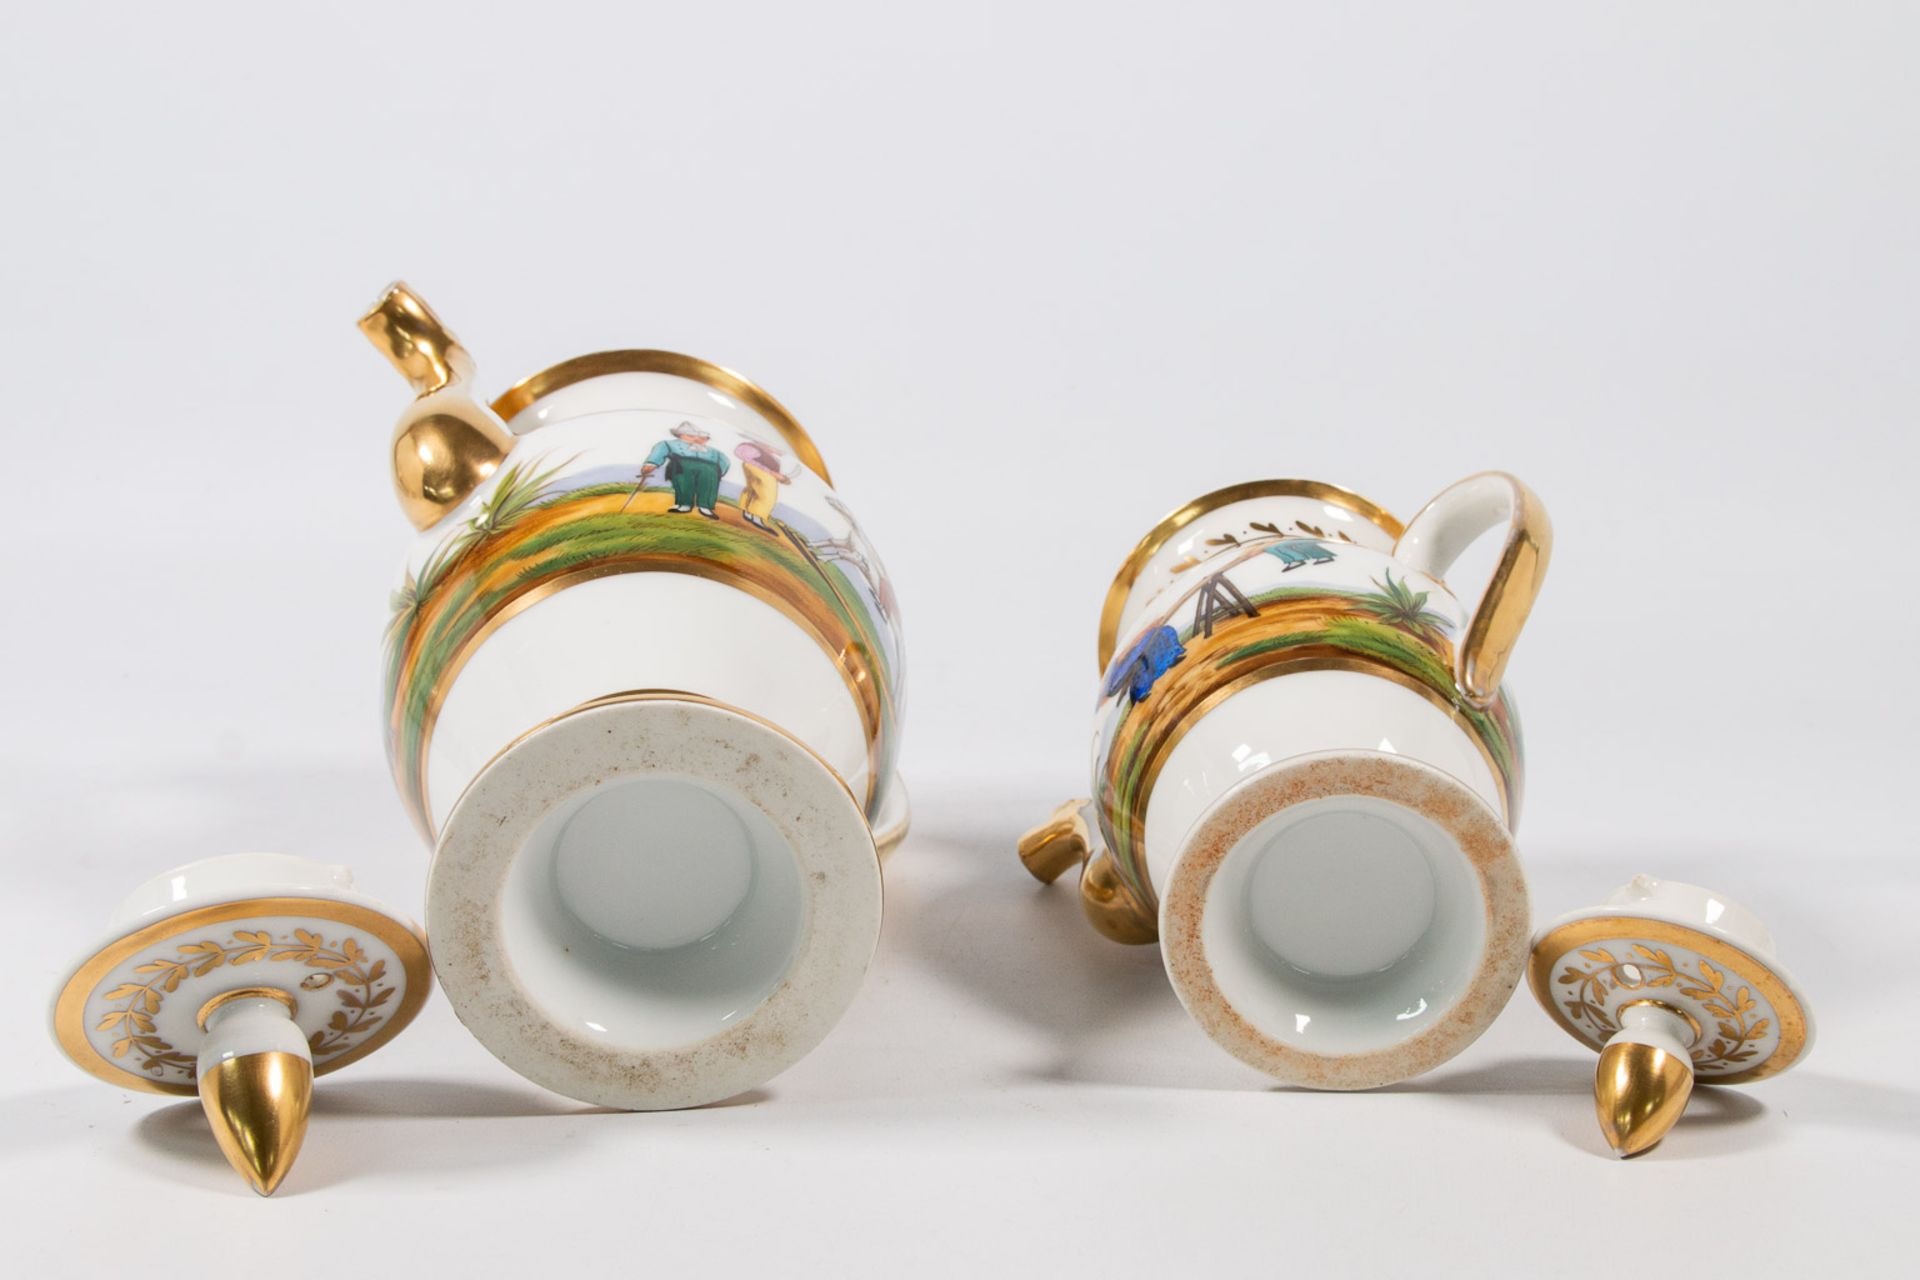 A Complete 'Vieux Bruxelles' coffee and tea service made of porcelain. - Image 46 of 53